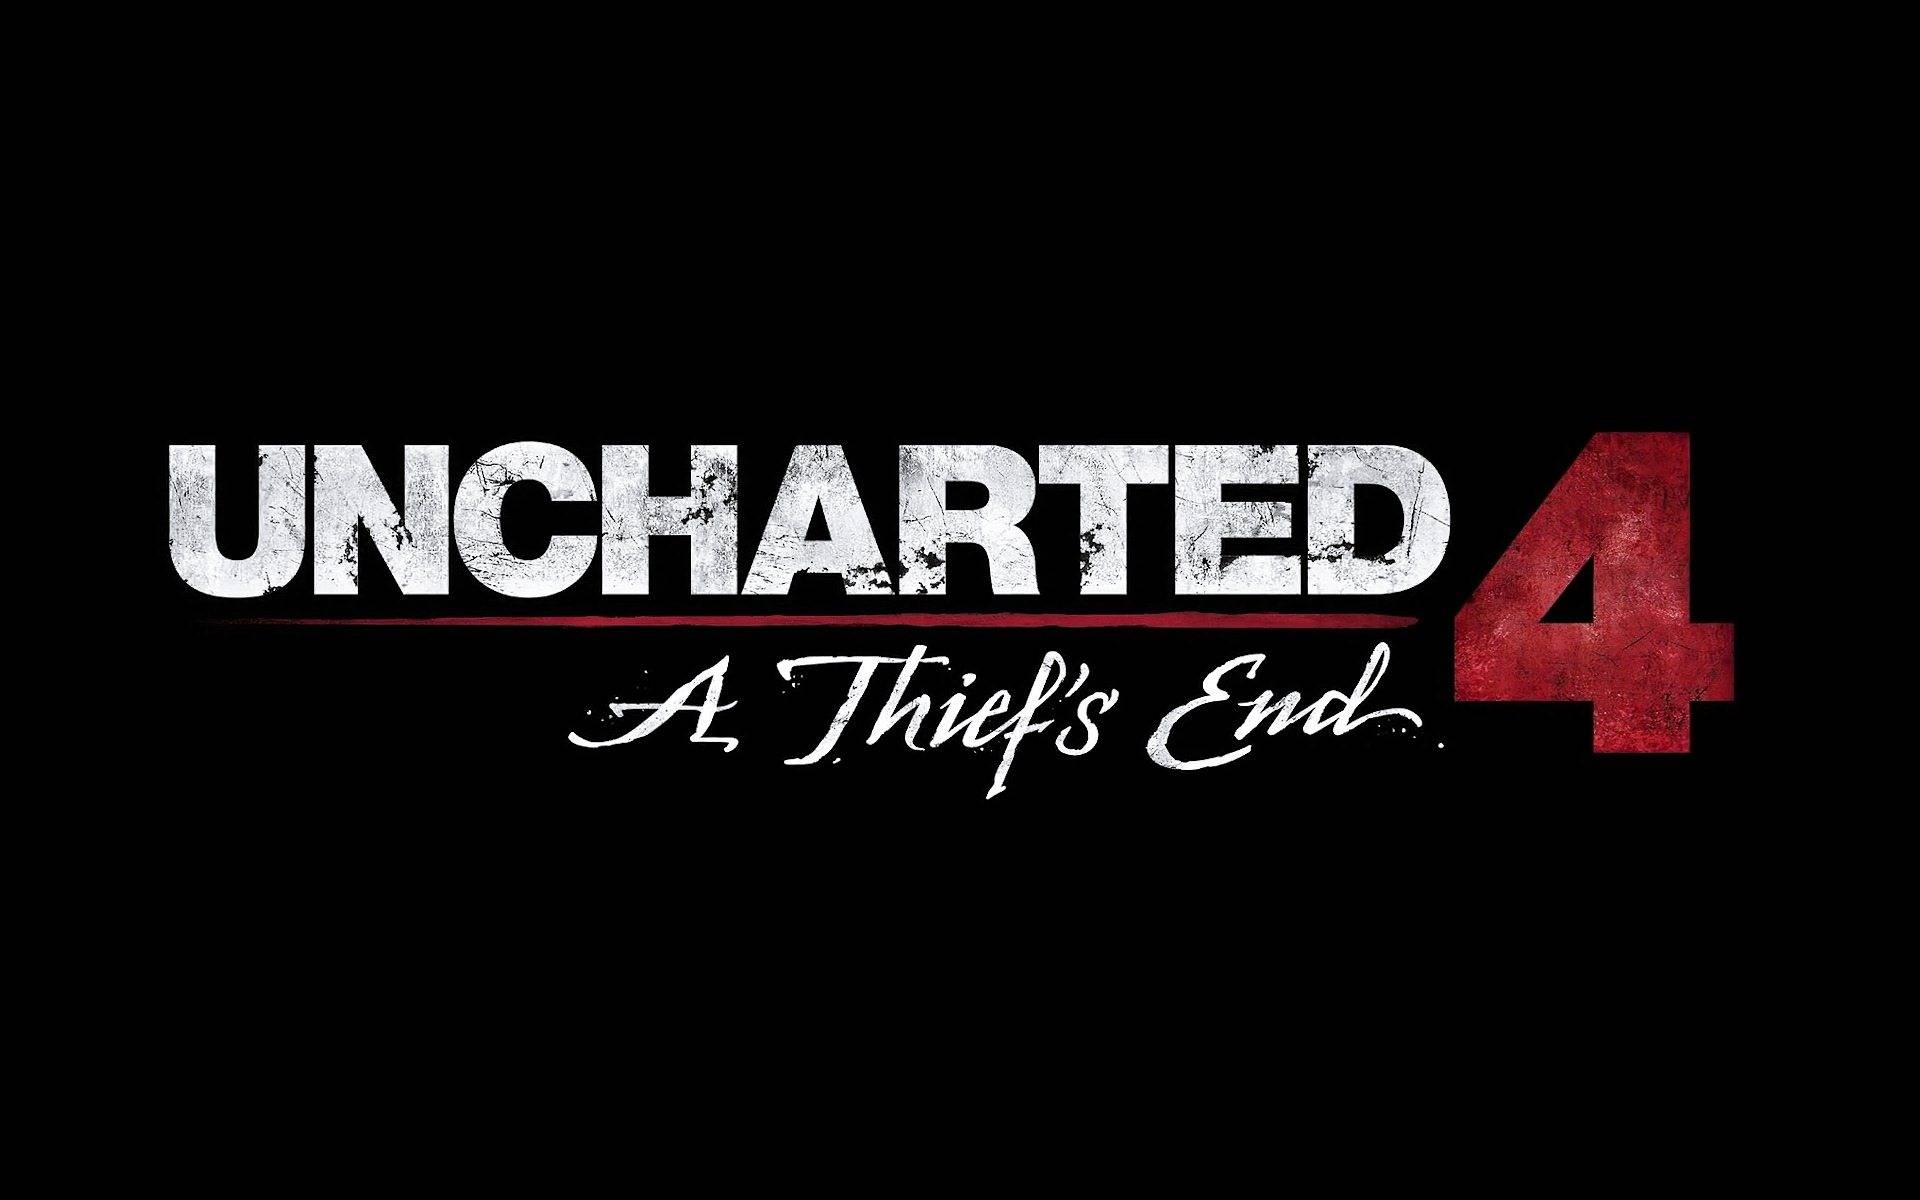 Uncharted 4 multiplayer gets a huge boost!